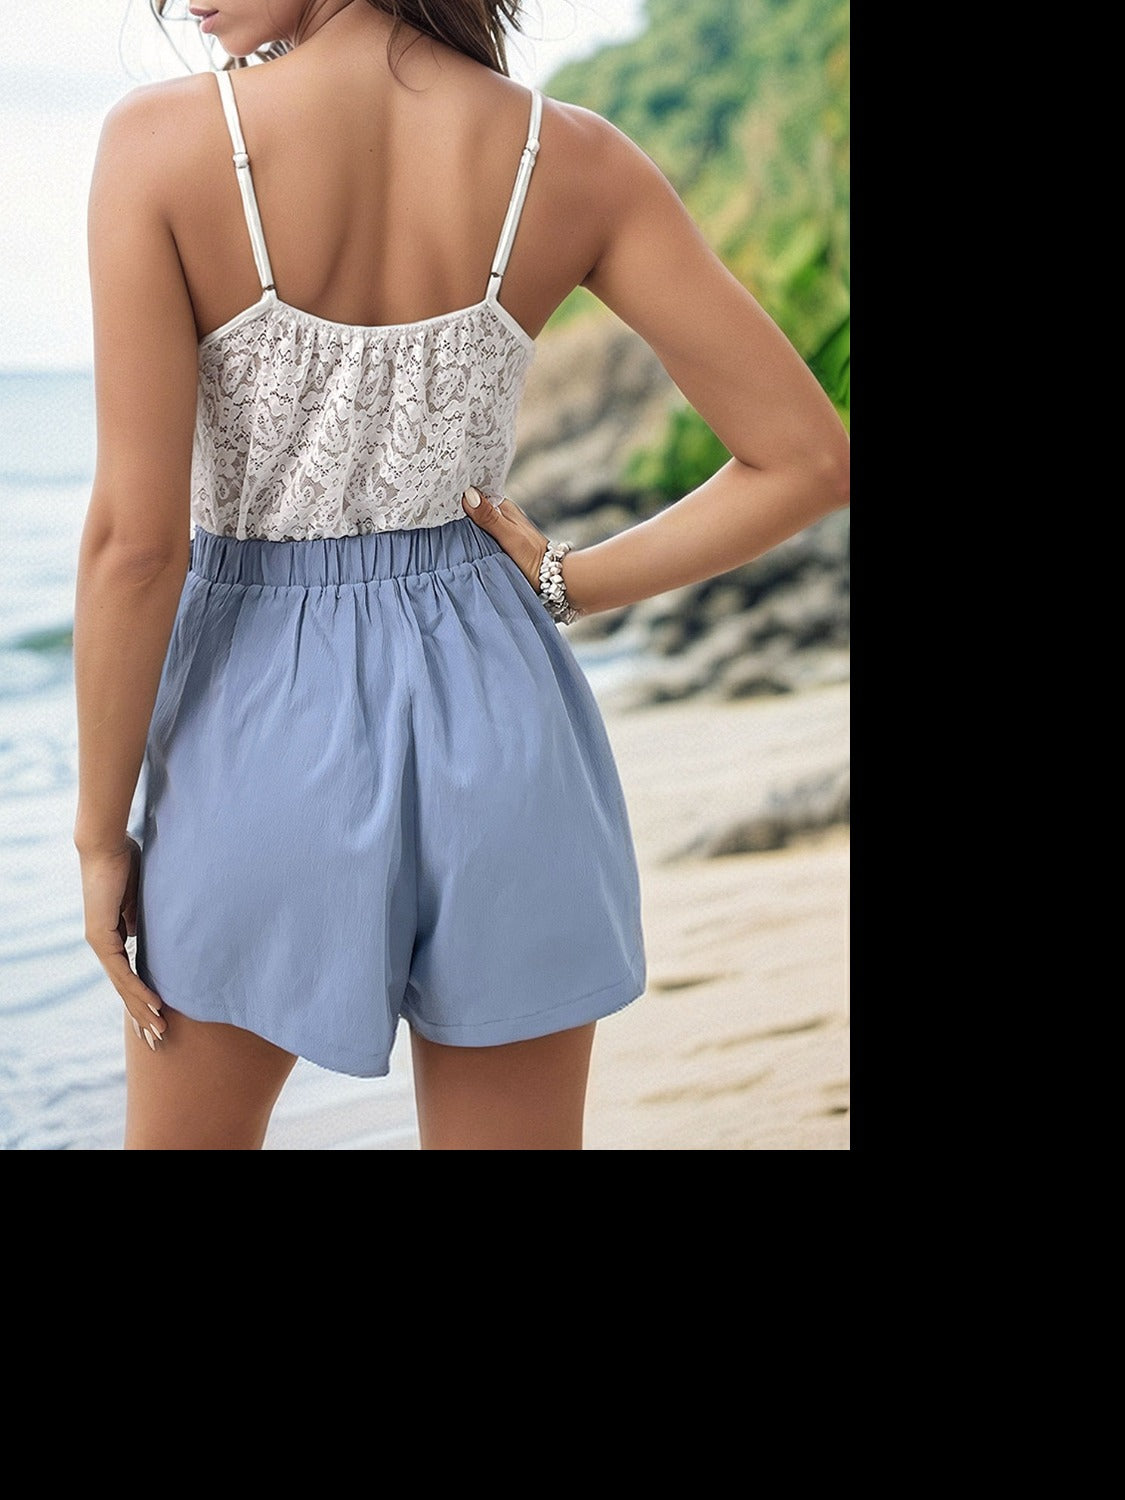 Chic Lace V-Neck Romper with adjustable straps, flattering silhouette & convenient pockets for a stylish, versatile summer look